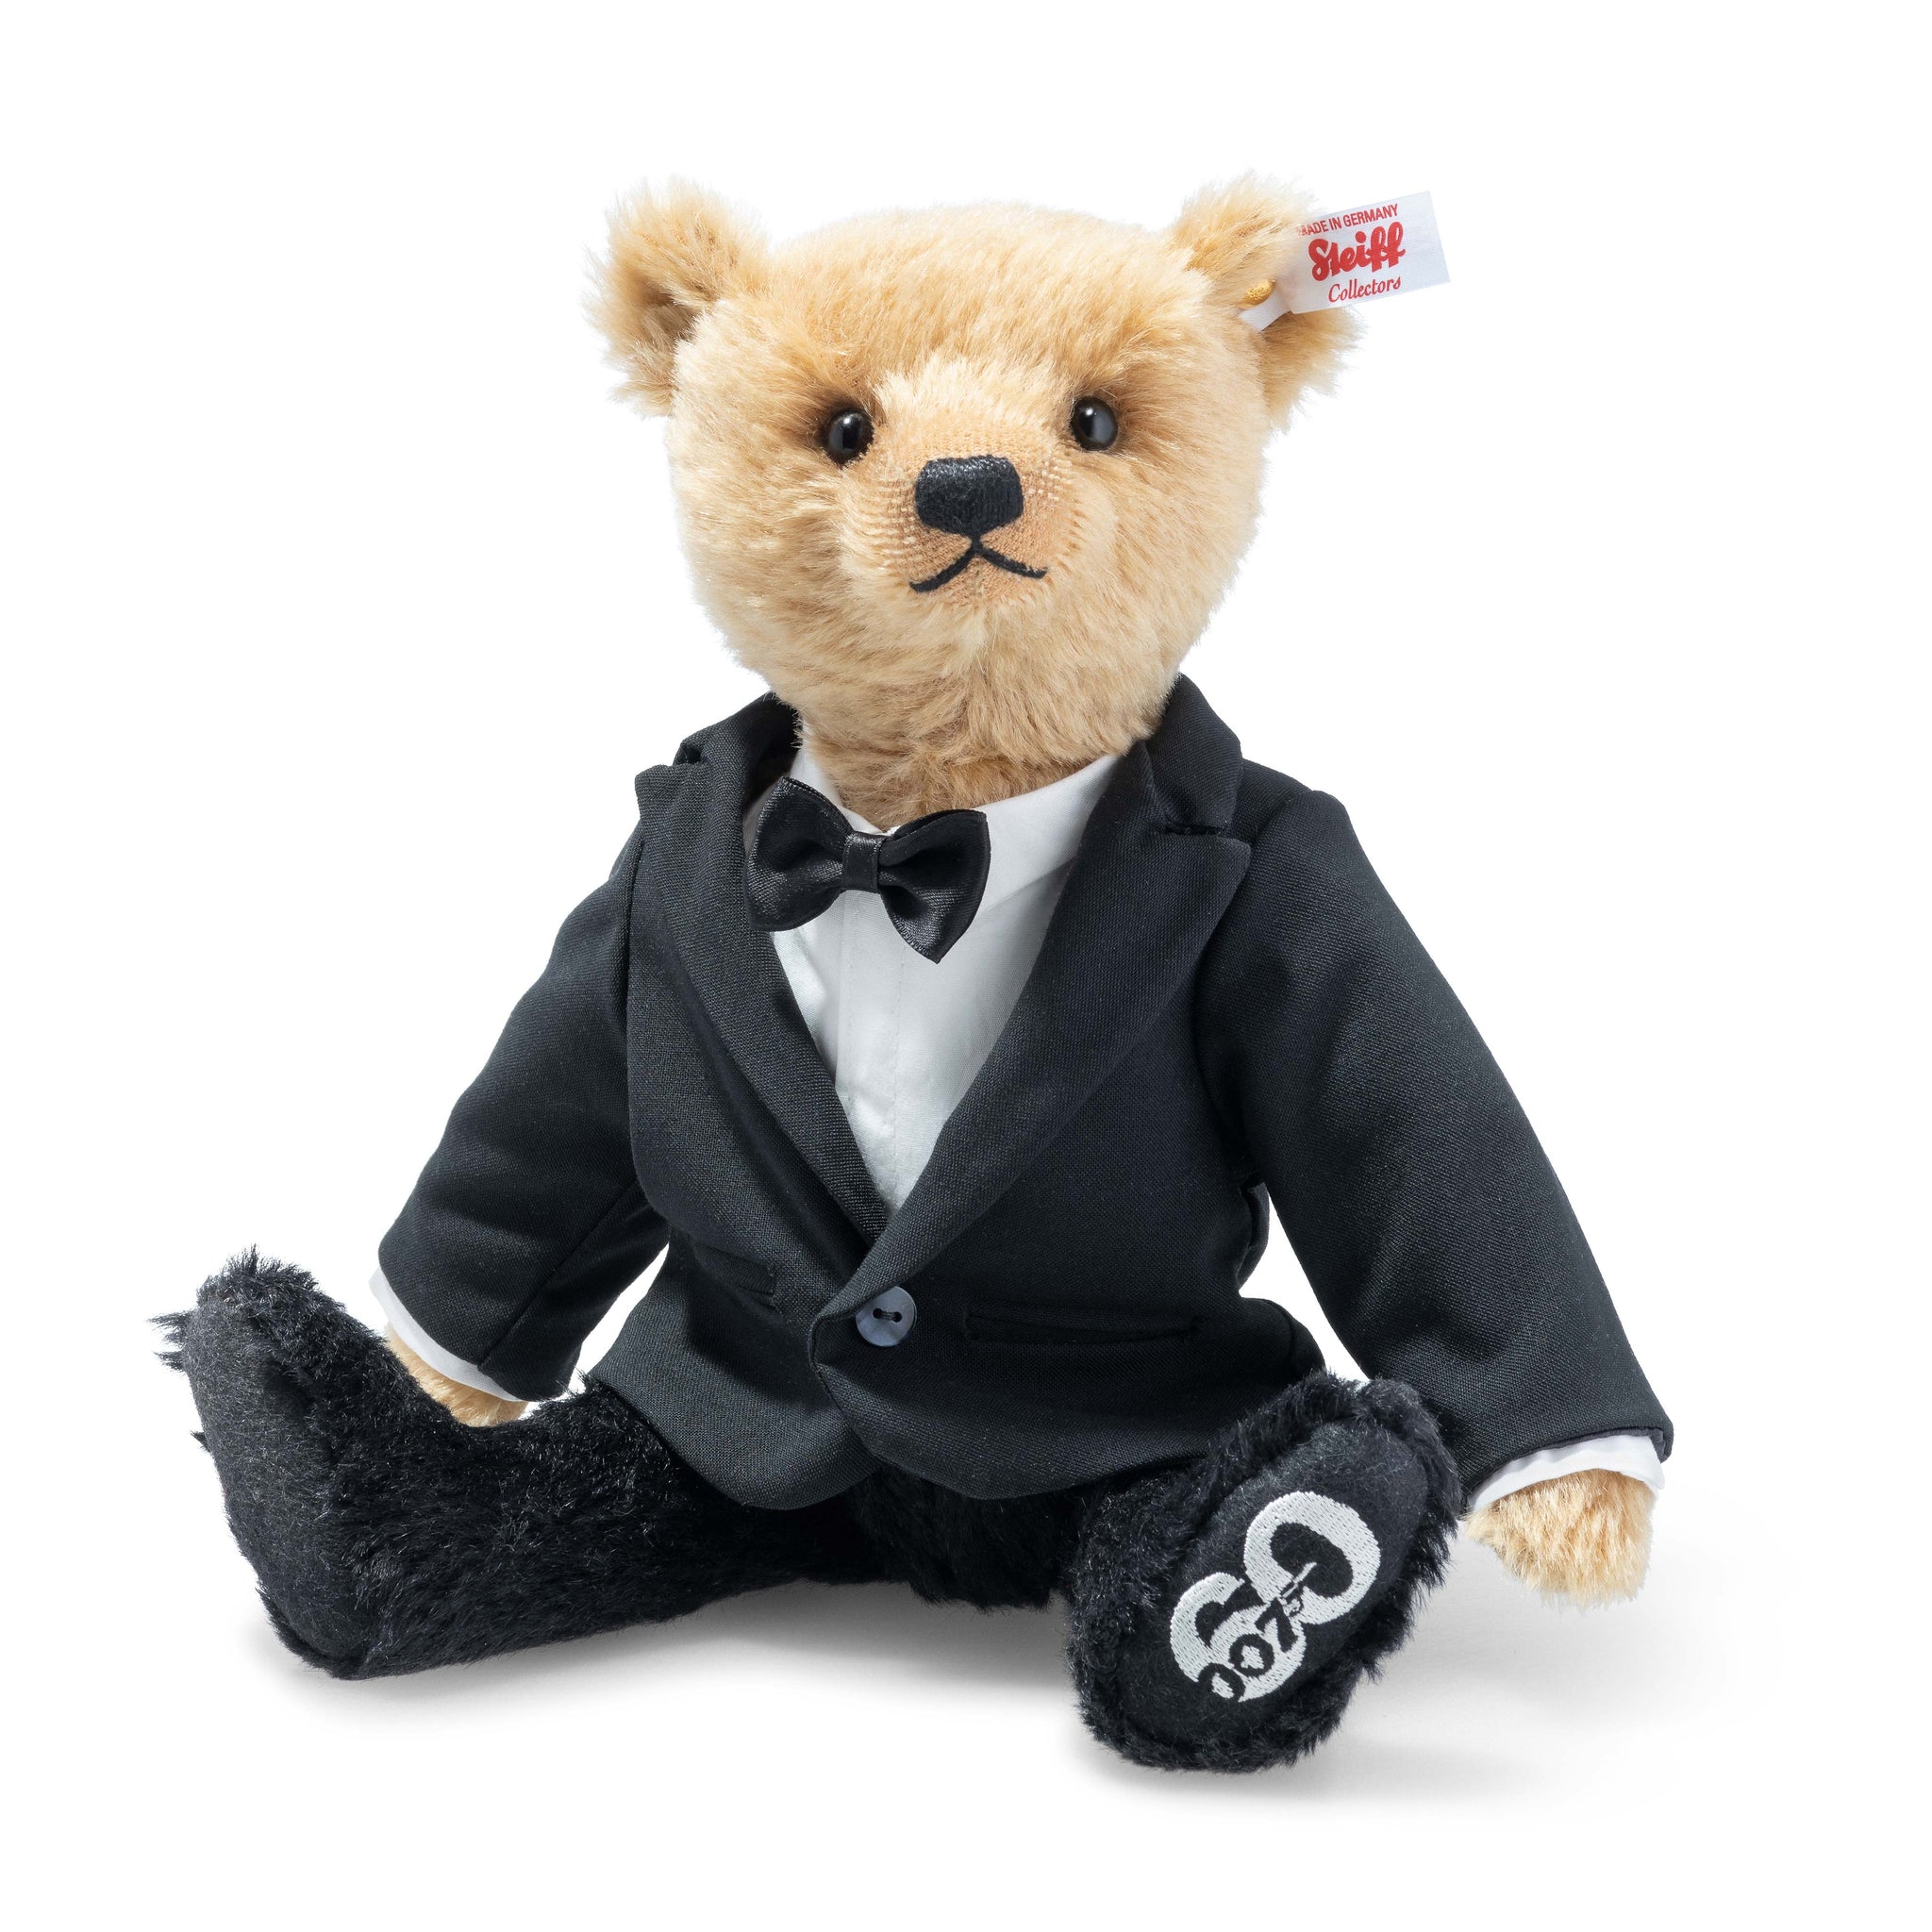 James Bond 60th Anniversary Bear Numbered Edition By Steiff | 007Store